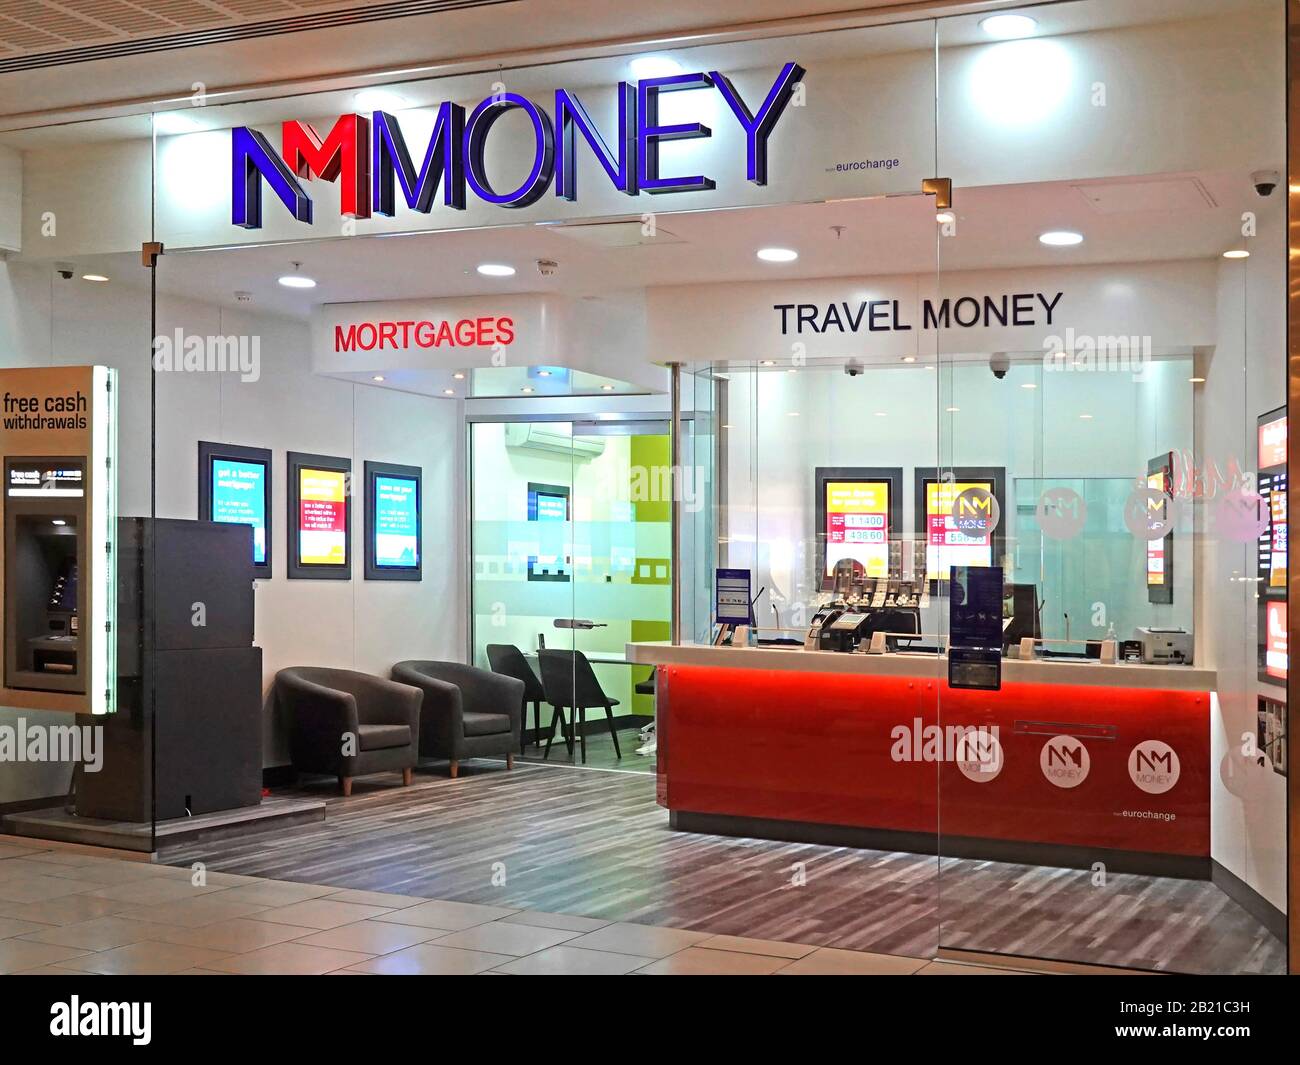 Acquista in anticipo e firma per NM Money business Dealing in Travel Money & Mortgages parte di NoteMachine Group ATM & eurochchange Intu Lakeside Essex England UK Foto Stock